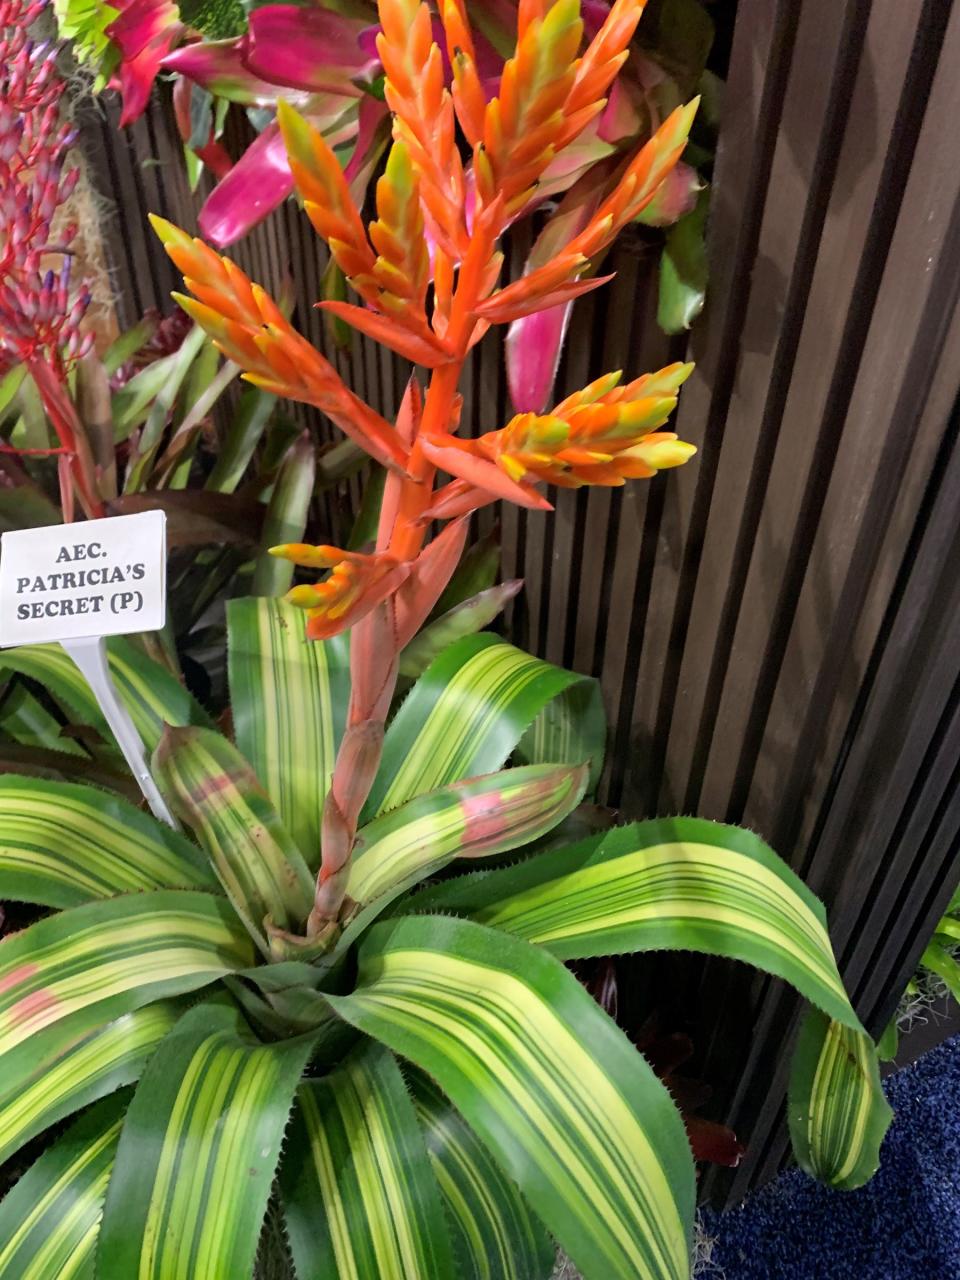 If you don’t have a lot of time and are looking for something low maintenance, you might want to try some easy-care bromeliads.